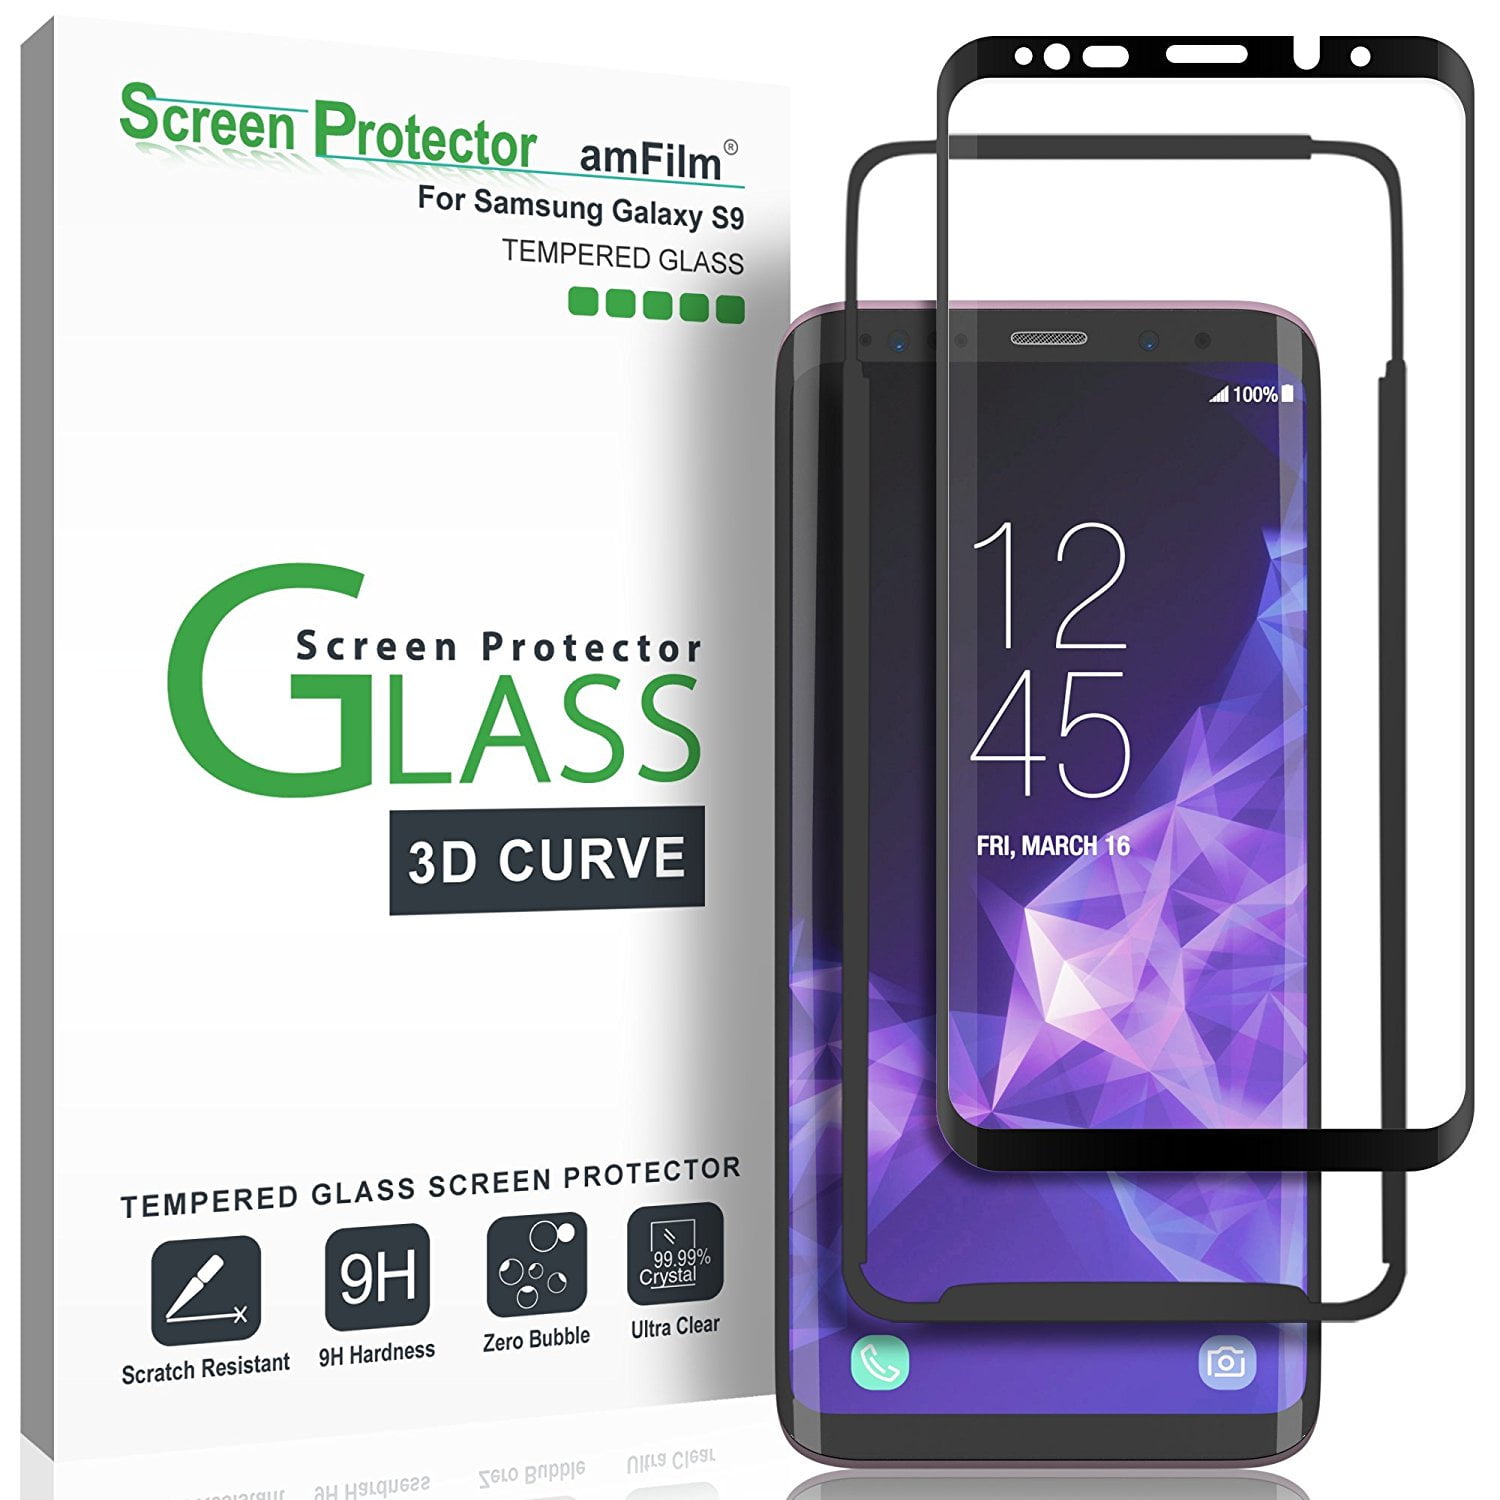 The Grafu Abrasion Resistance Anti Scratch 9H Hardness Screen Protector for Samsung Galaxy J7 2016 1 Pack Galaxy J7 2016 Screen Protector Tempered Glass 